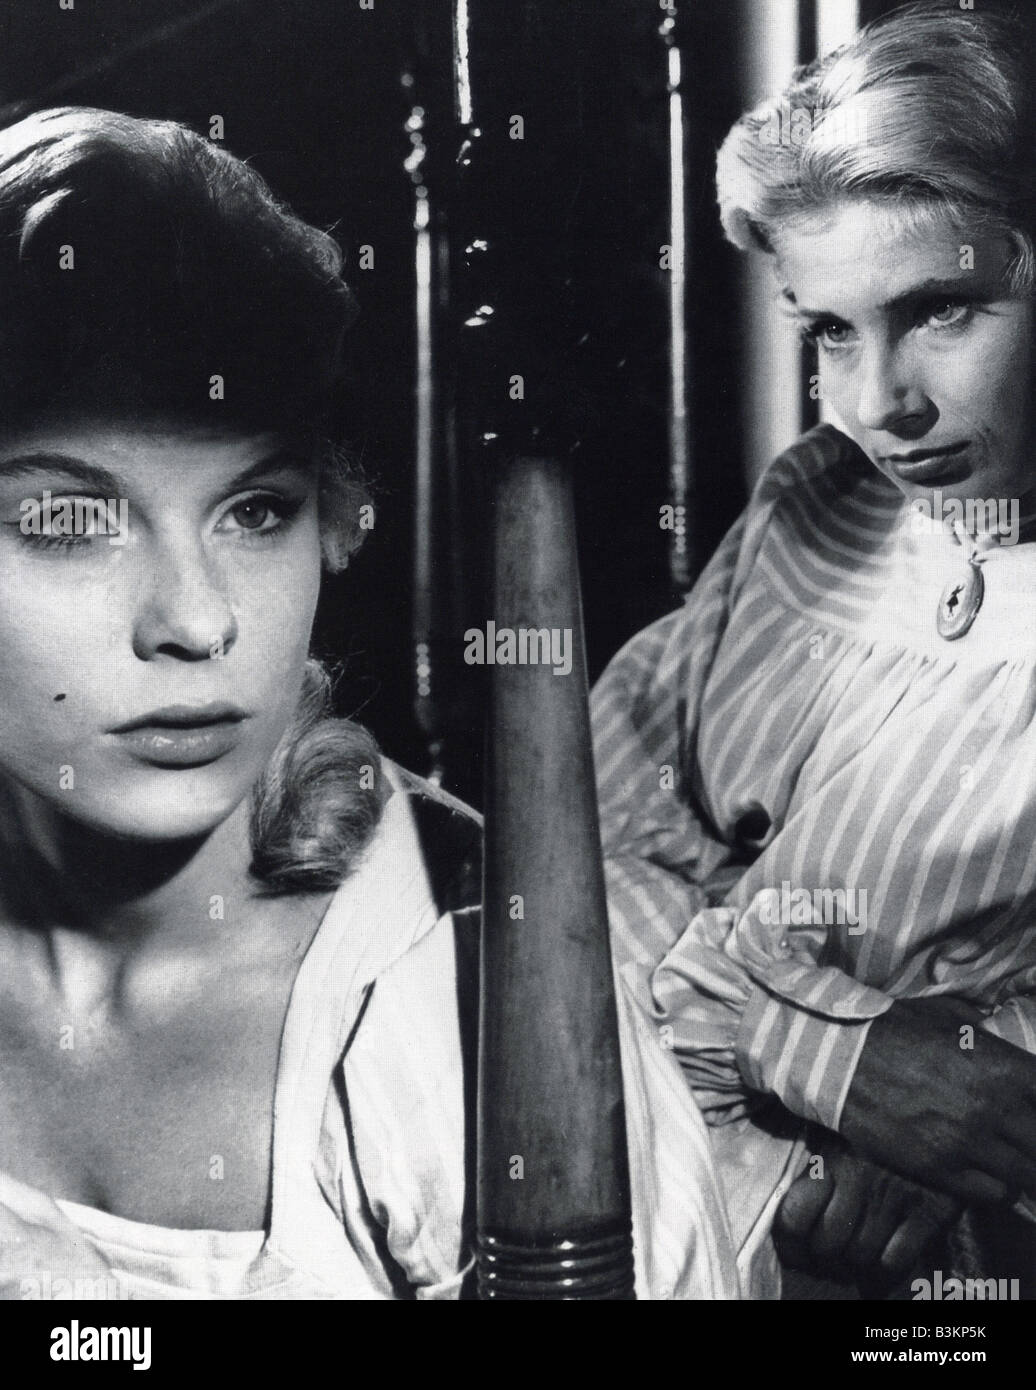 WILD STRAWBERRIES  1957 Svensk Filmindustri film with Ingrid Thulin at right and Bibi Andersson, directed by Ingmar Bergman Stock Photo